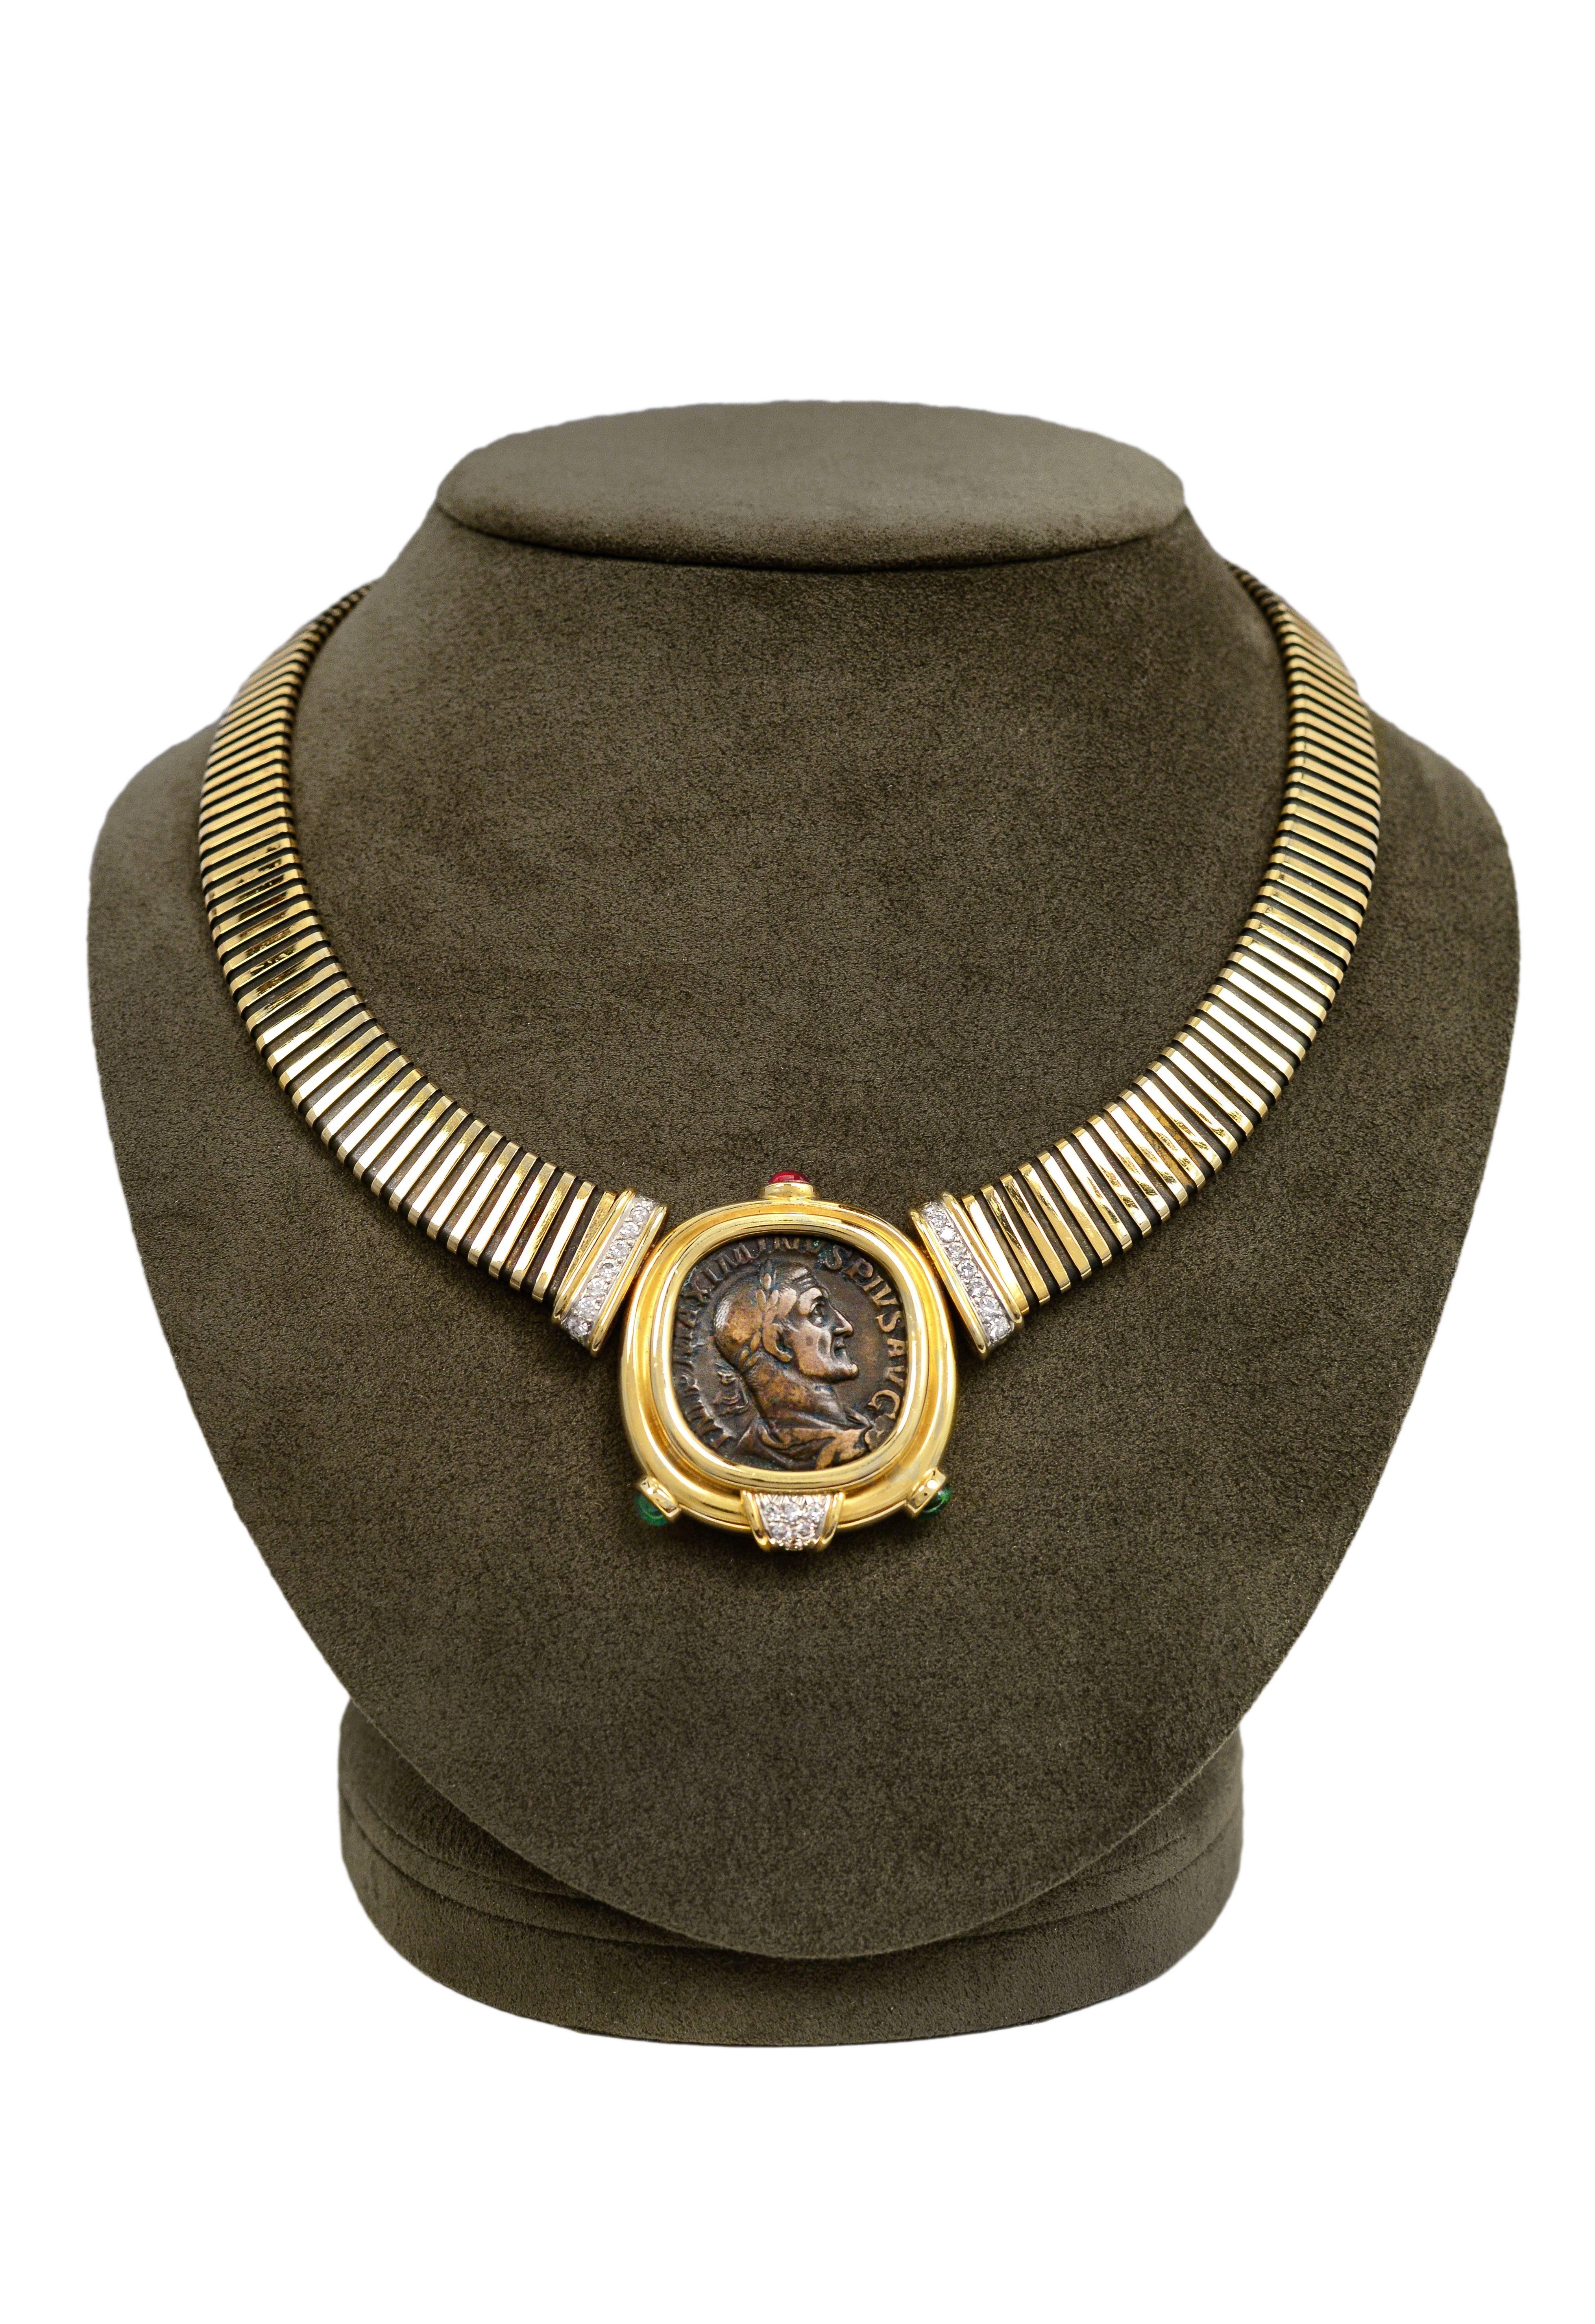 A stunning and highly-stylized Bulgari Monete necklace with semi rubies, emeralds and diamonds. The necklace features a large ancient coin with 18K gold bezel and Tubogas coil. Stamped BULGARI on reverse of bezel. Necklace circa 1980's. 

*Please